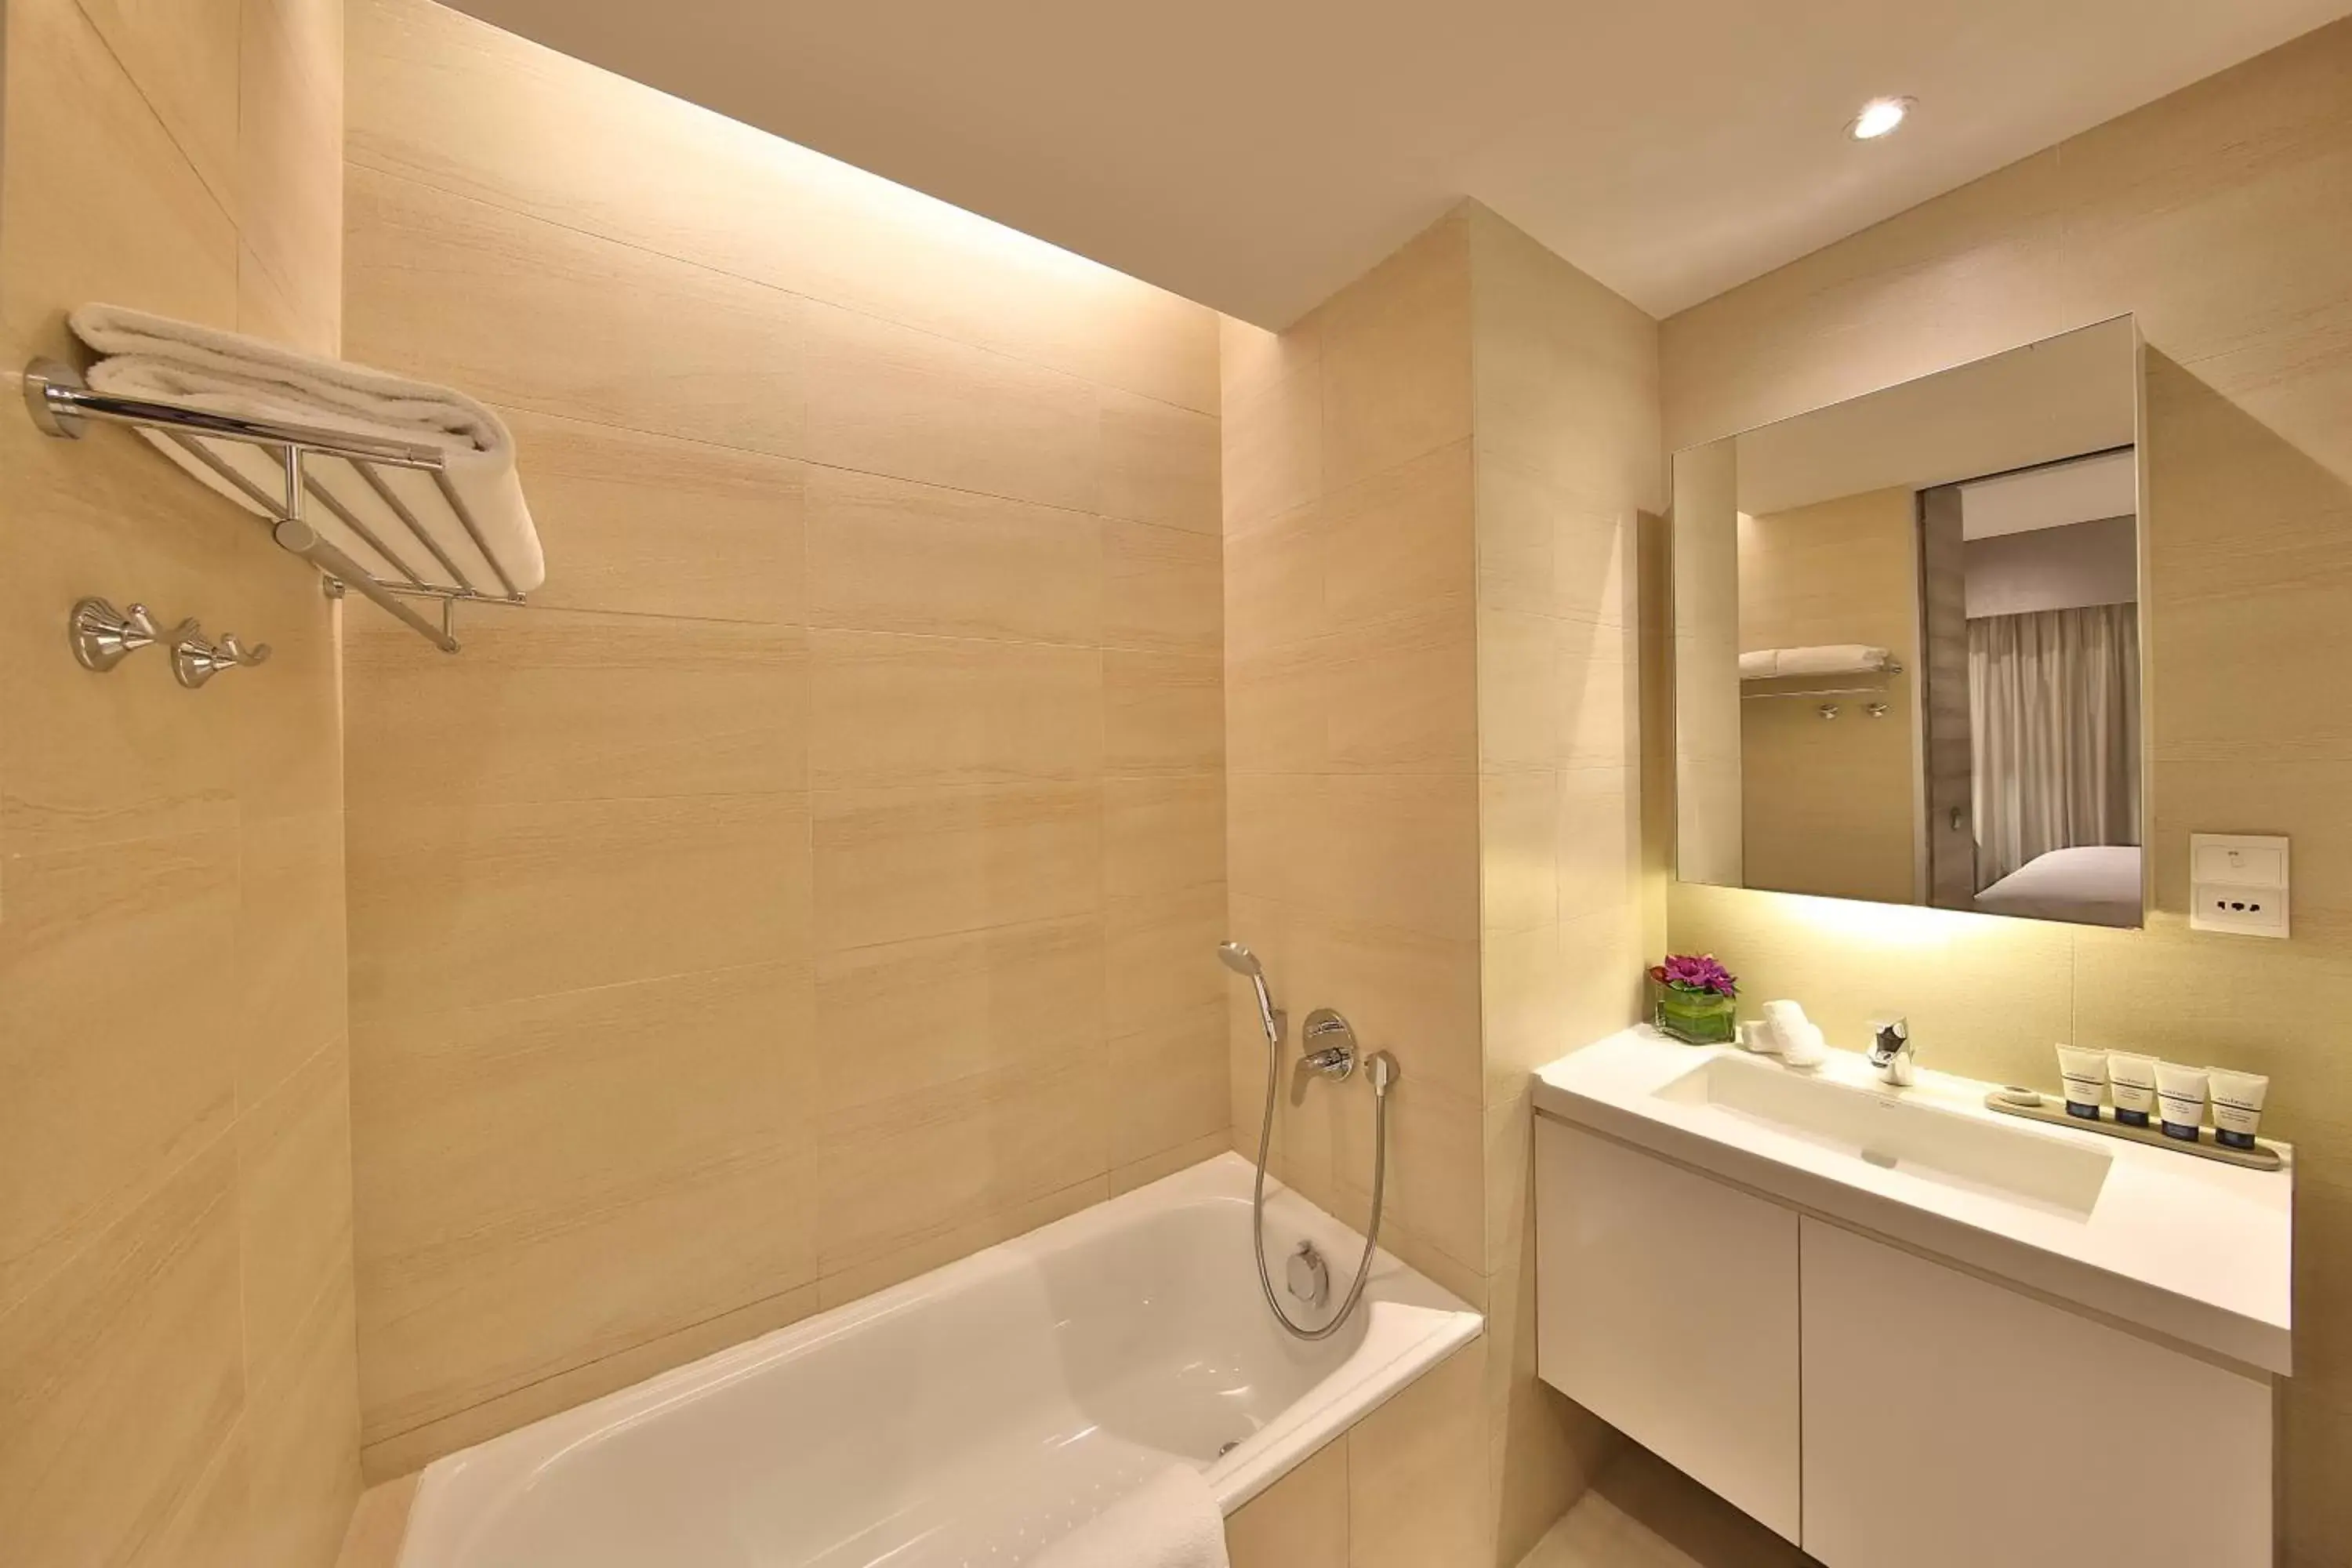 Bathroom in Pan Pacific Serviced Suites Beach Road, Singapore